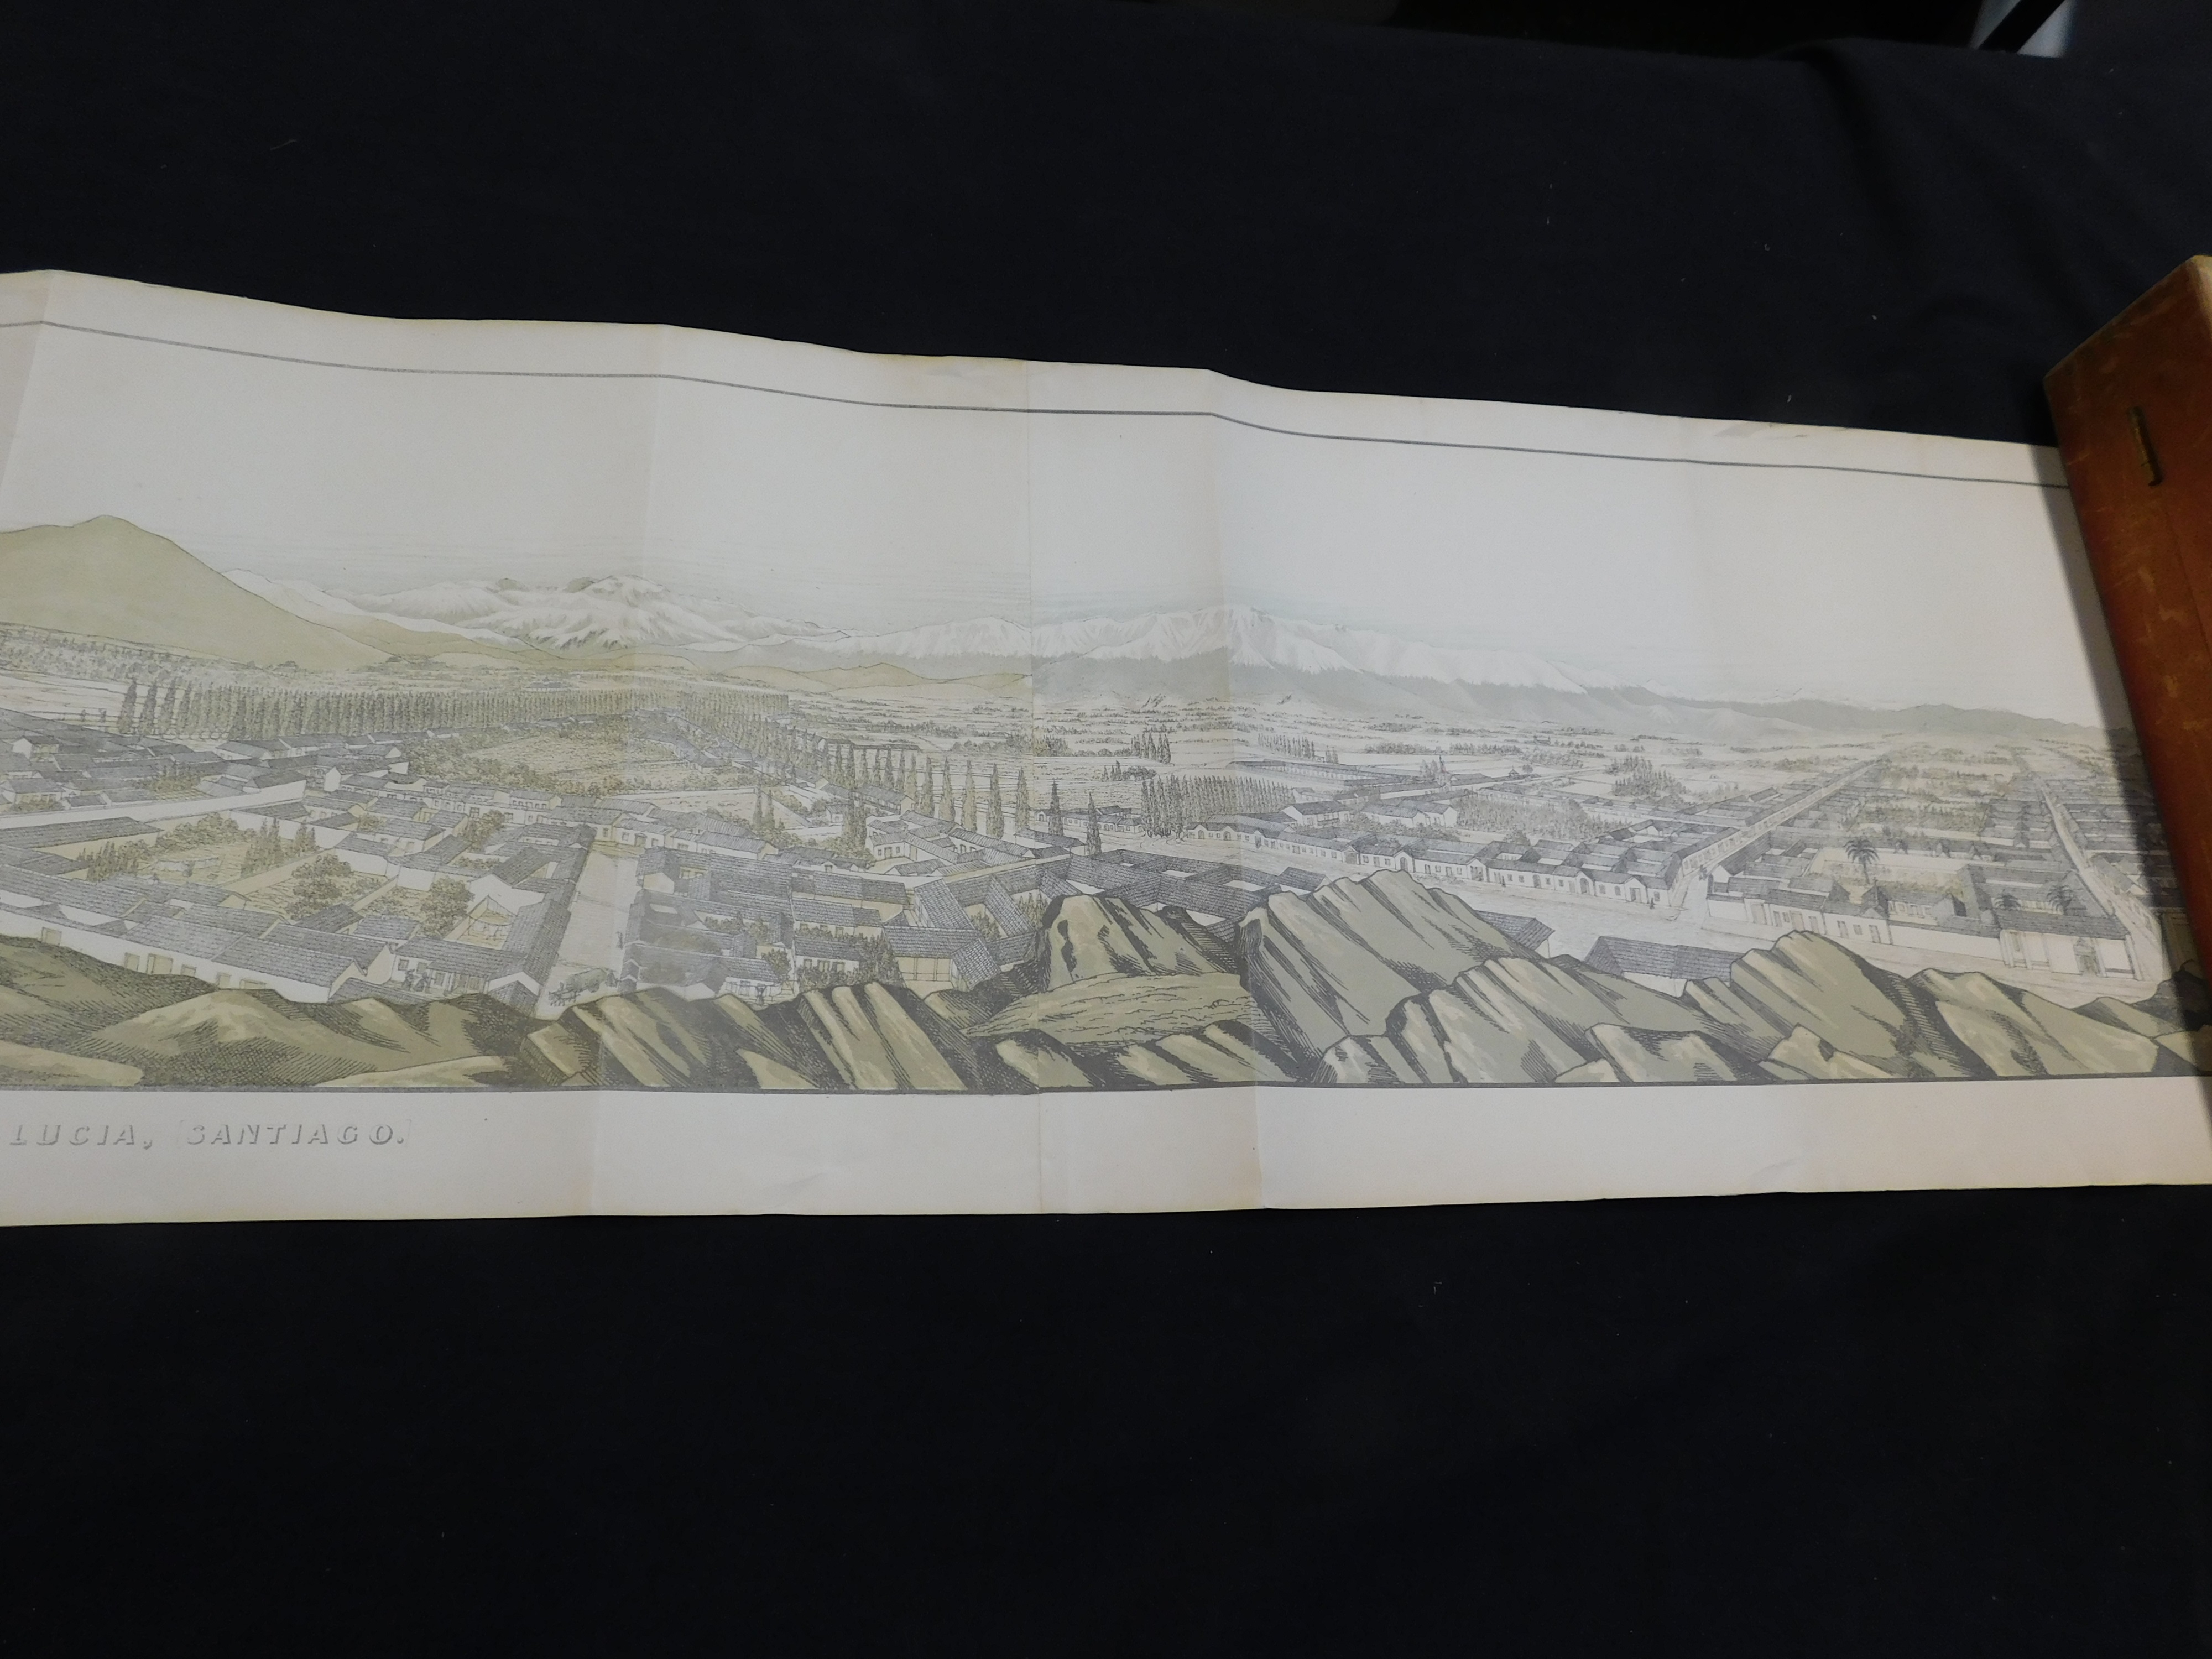 EDWARD REVEL SMITH: PANORAMIC VIEW FROM THE SUMMIT OF SANTA LUCIA SANTIAGO, coloured litho panoramic